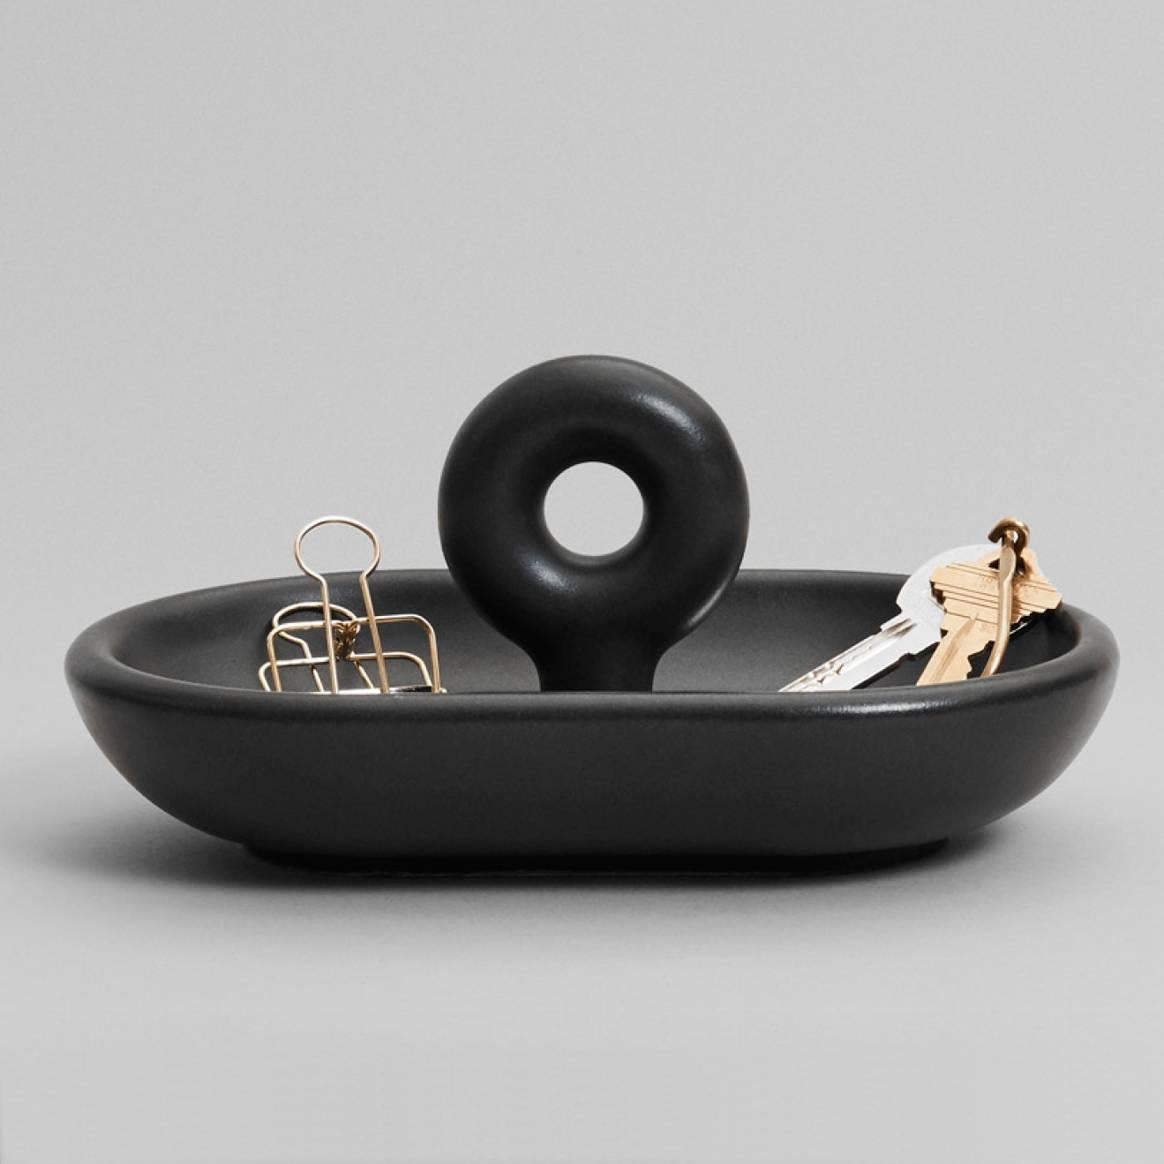 As functional as it is beautiful, this catchall is available in matte black or gloss white 3D Printed Porcelain and two sizes. The thickness and weight of this catchall redefines what is possible in porcelain due to transformative technologies. Each